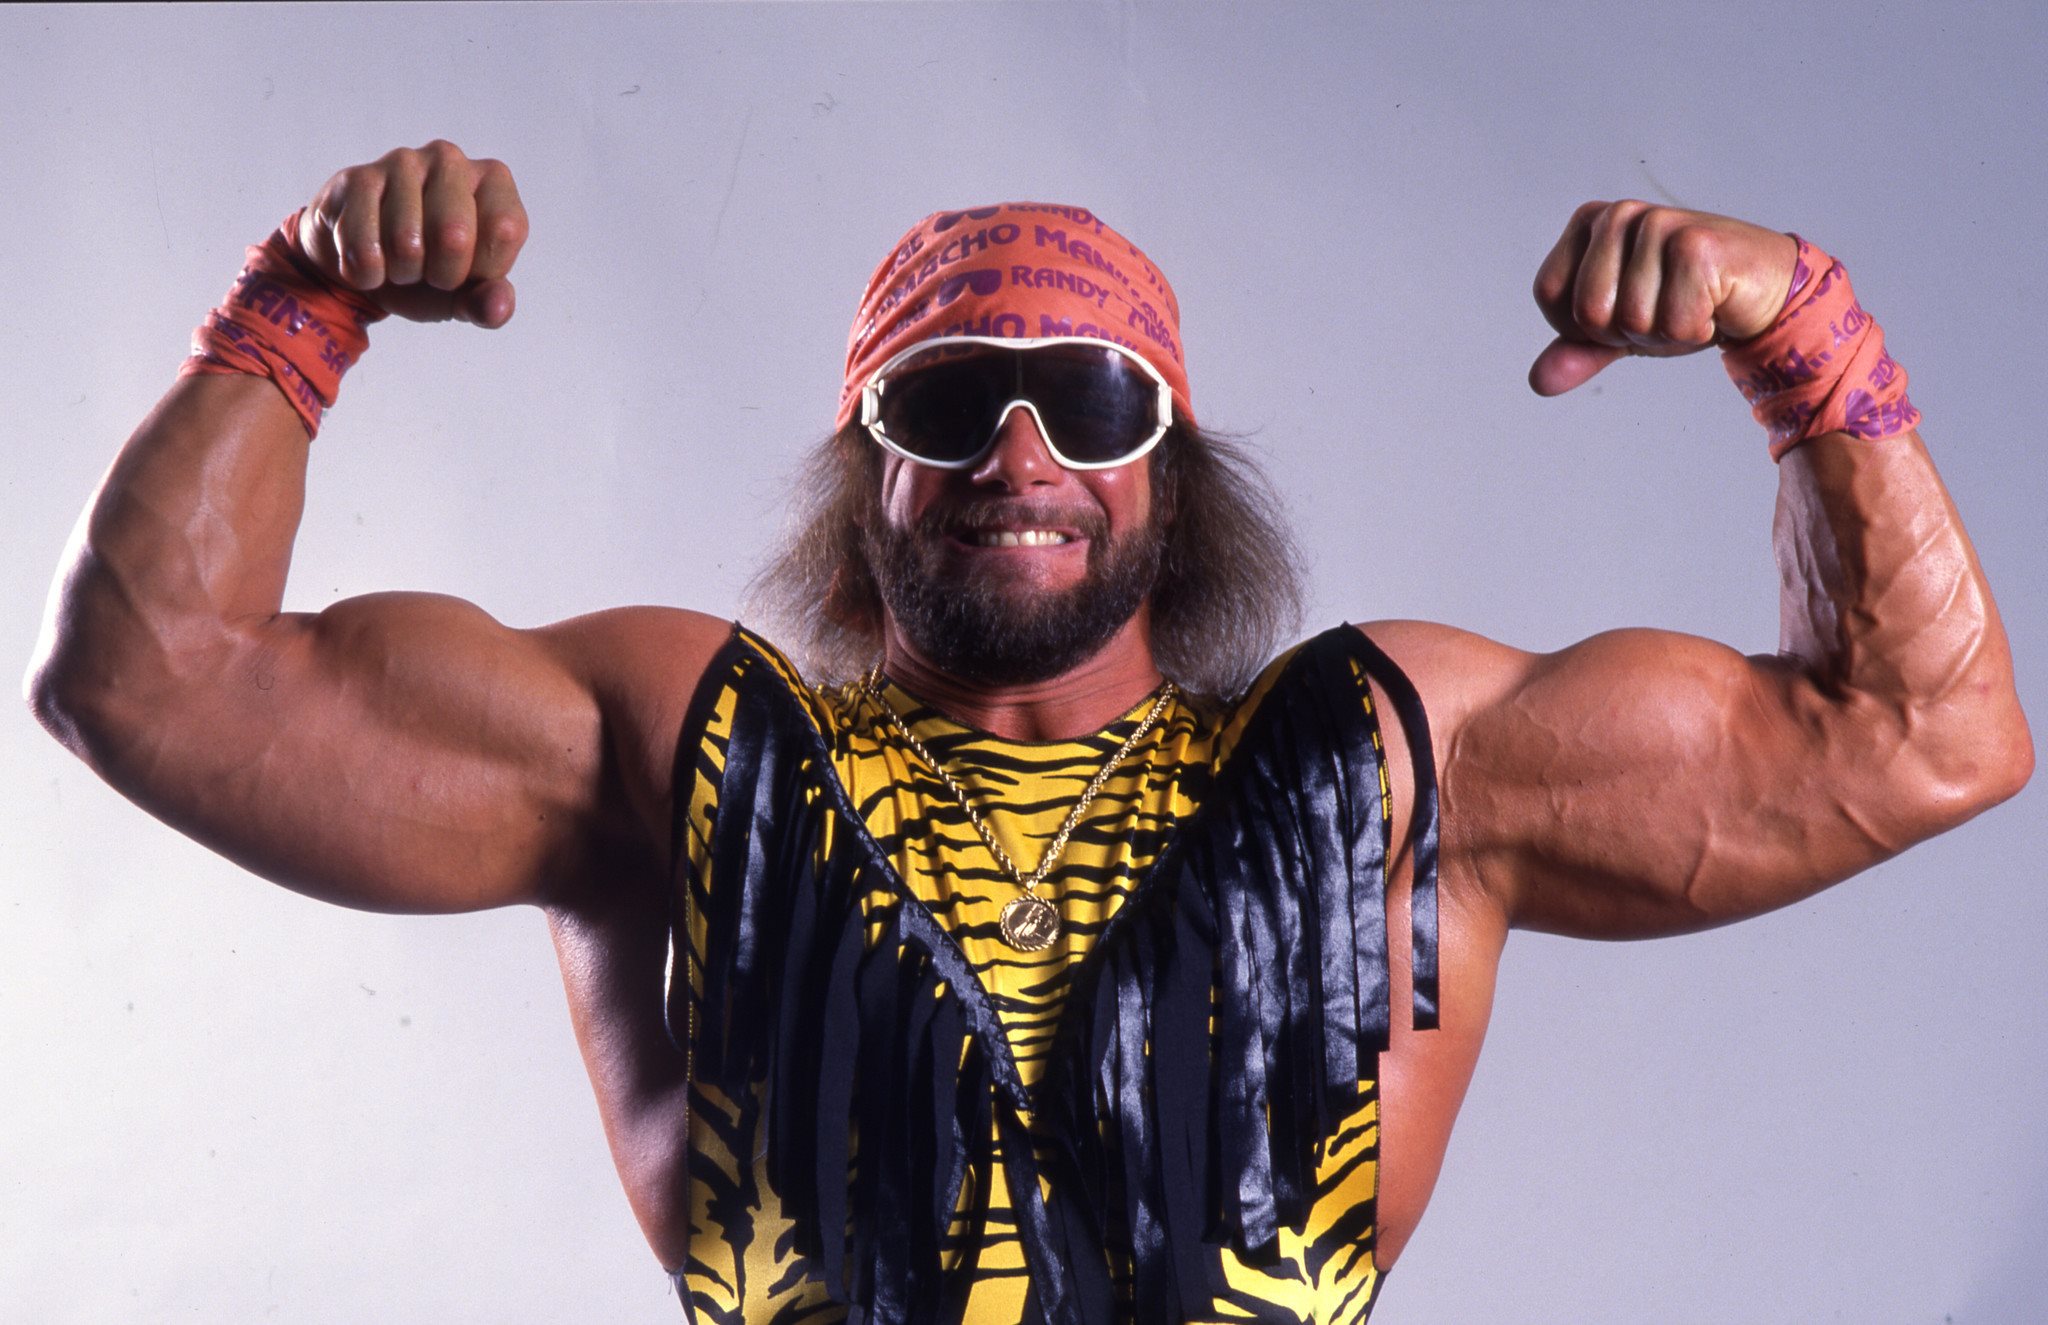 20 Facts About Randy Savage 